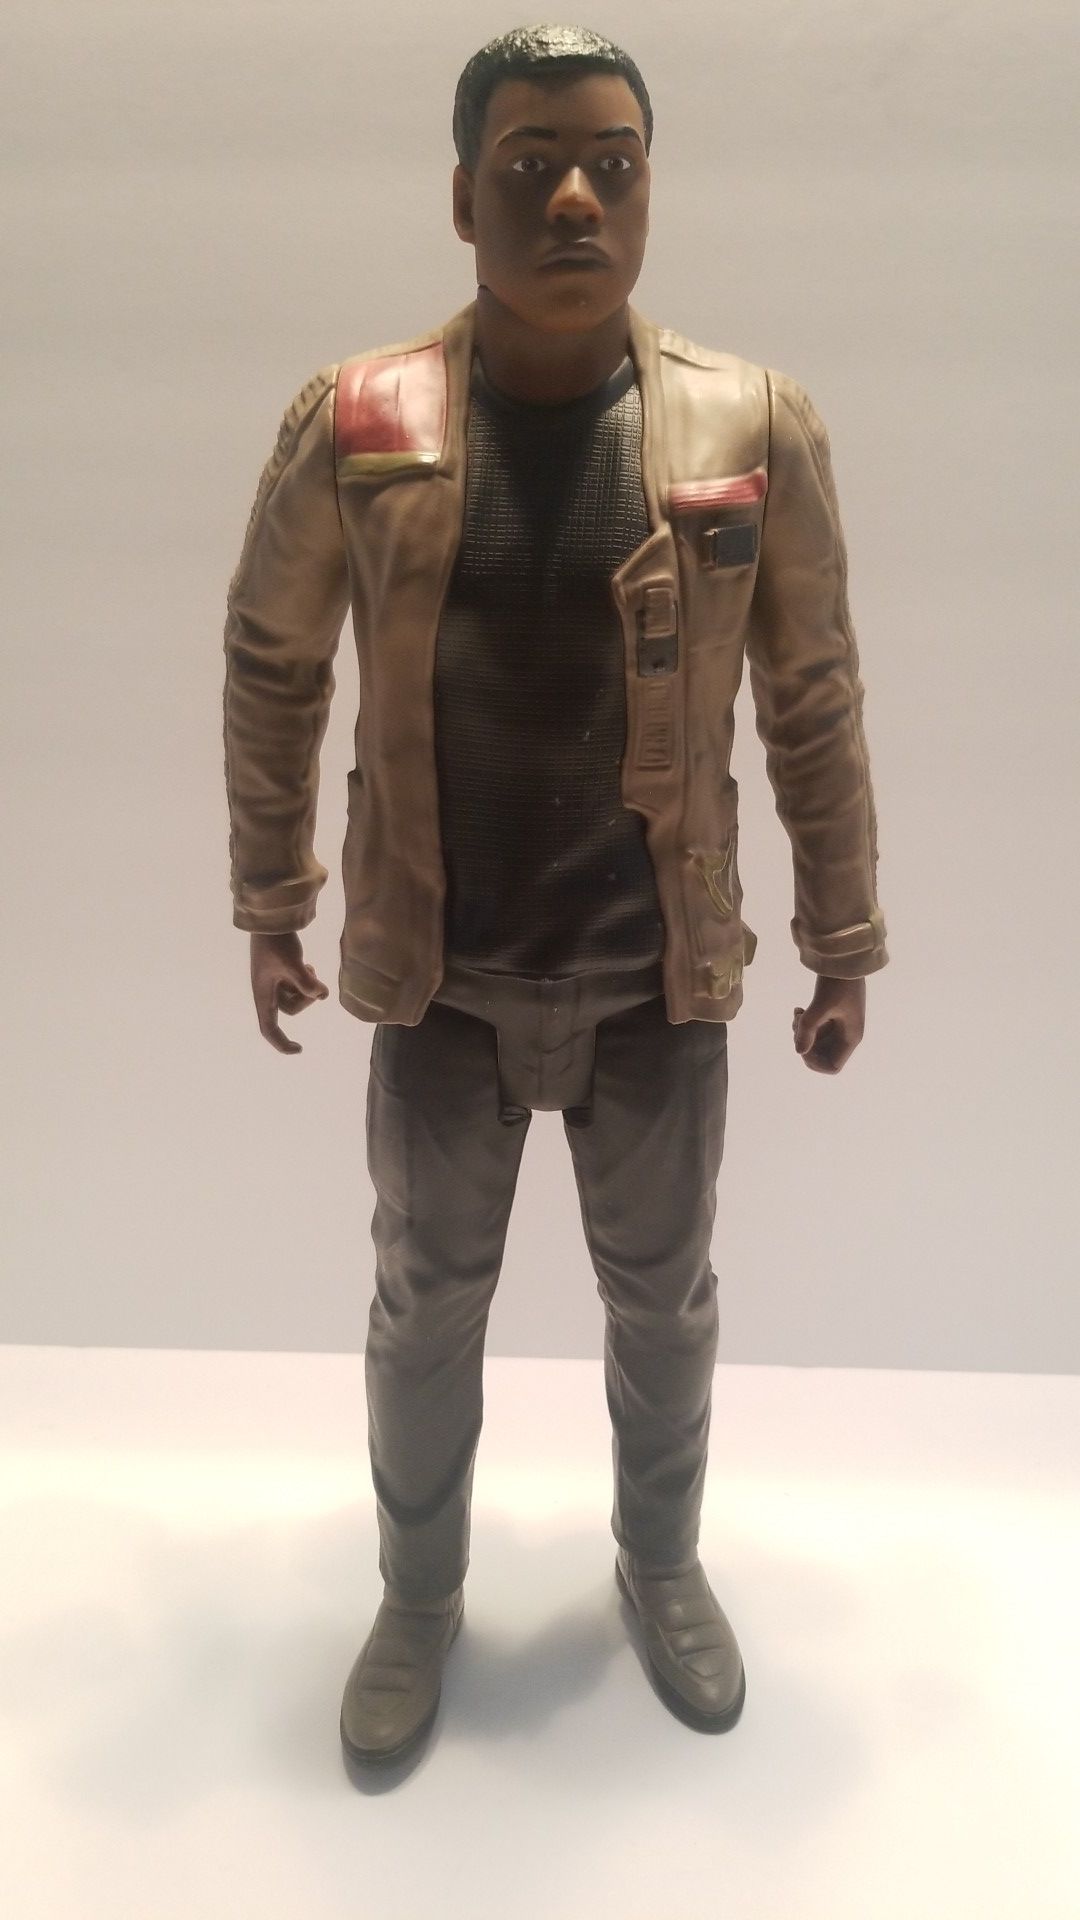 Star Wars Finn figure 19" moveable arms & legs; excellent condition